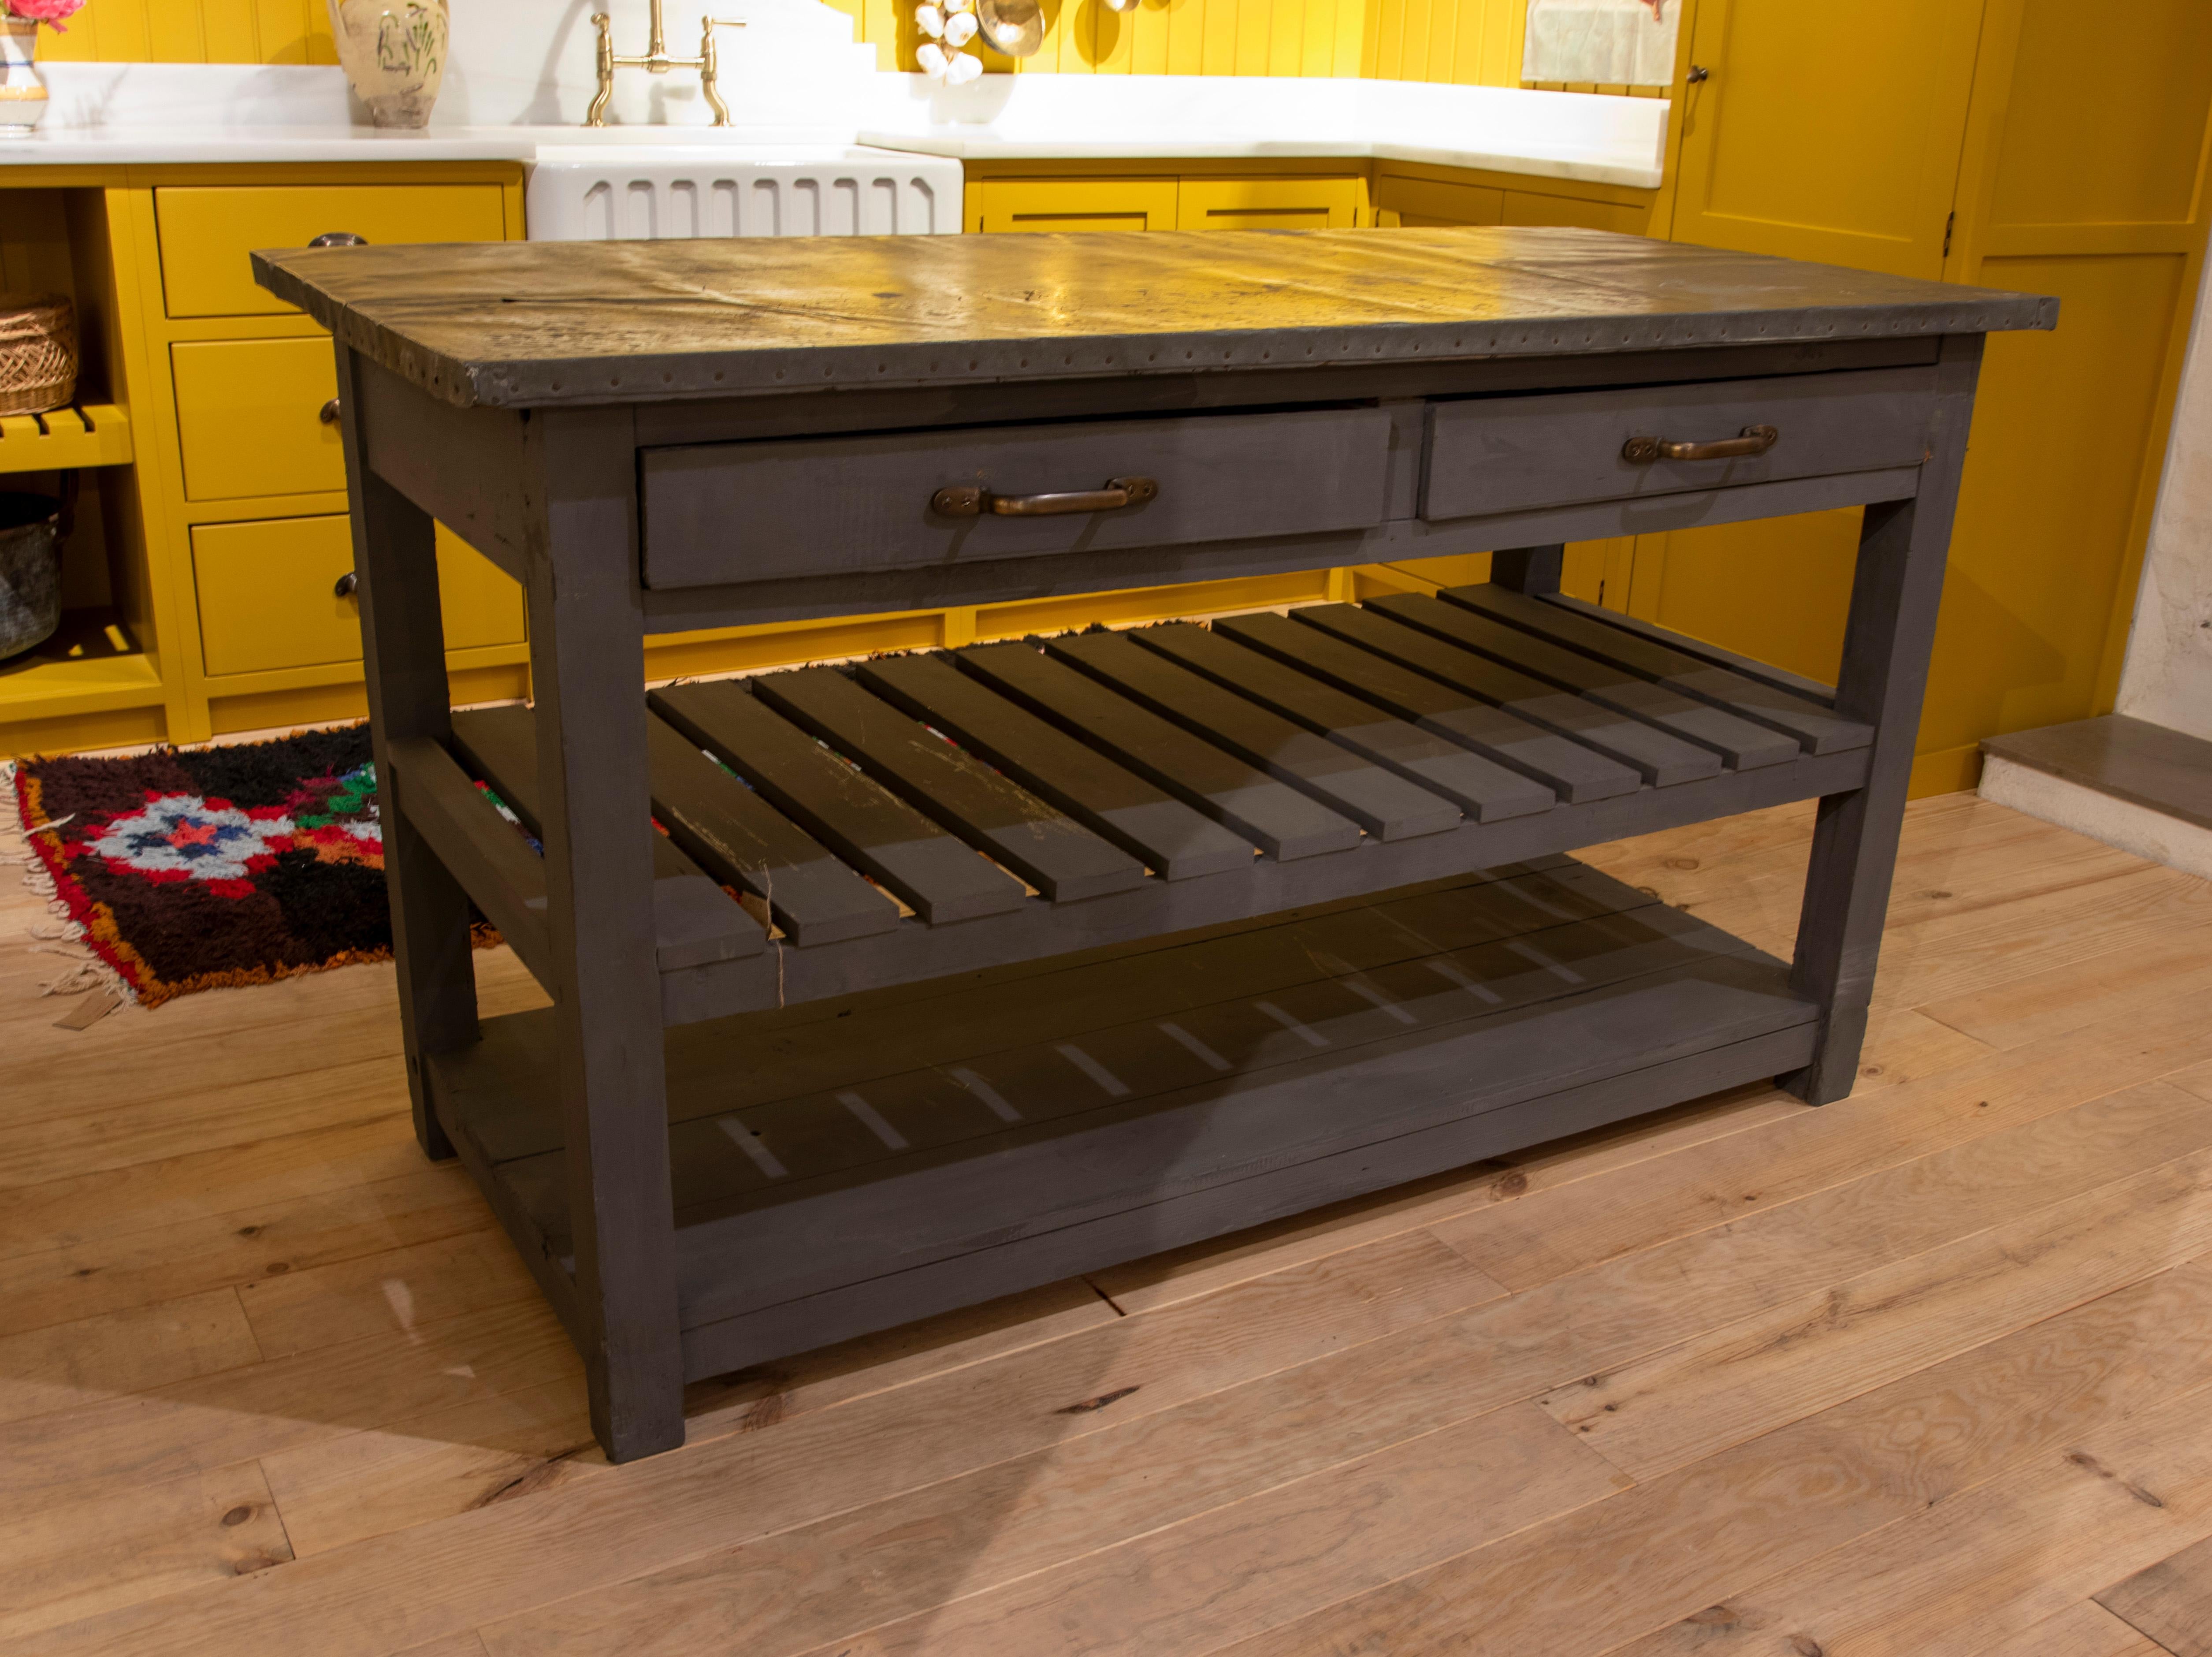 Wooden Kitchen table with metal top, drawers and two lower shelves.